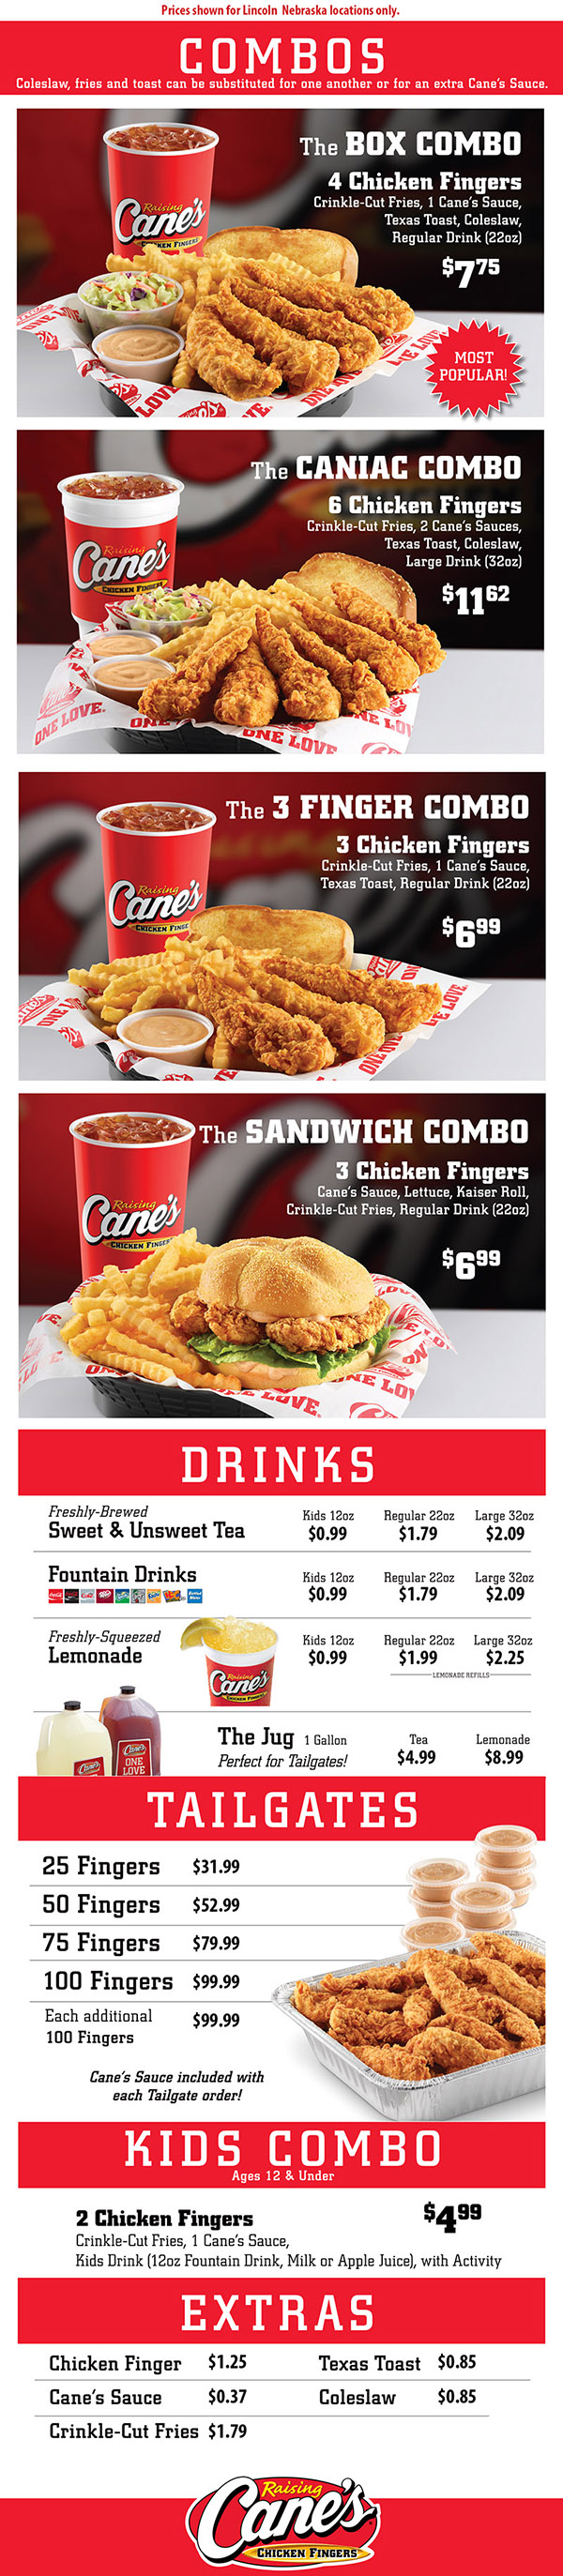 Raising Cane's Chicken Fingers Menu With Prices - Lincoln Nebraska - 
  The Box Combo
Four Chicken Fingers, Crinkle-Cut Fries, One Cane's Sauce, Texas Toast, Coleslaw, Regular Drink (22oz) $7.75

The Caniac Combo
Six Chicken Fingers, Crinkle-Cut Fries, Two Cane's Sauce, Texas Toast, Coleslaw, Large Drink (32oz) $11.62

The 3 Finger Combo
Three Chicken Fingers, Crinkle-Cut Fries, One Cane's Sauce, Texas Toast, Regular Drink (22oz) $6.99

The Sandwich Combo
Three Chicken Fingers, Cane's Sauce, Lettuce, Kaiser Roll, Crinkle-Cut Fries, Regular Drink (22oz) $6.99

The Kids Combo
Two Chicken Fingers, Crinkle-Cut Fries, One Cane's Sauce, Kids Drink (12oz Fountain Drink, Milk or Apple Juice) with Activity. More Info  $4.99

Tailgates
Available in Quantities of 
25 Fingers $31.99 
50 Fingers $52.99
75 Fingers $79.99 
100 Fingers $99.00 
Each Sadditonal 100 $99.00
Cane’s Sauce included with each Tailgate order

Fresh Brewed Sweet & Unsweet Tea kids 12oz $.99, 22oz $1.79, 32oz $2.09
Fountain Drinks kids 12oz $.99, 22oz $1.79, 32oz $2.09
Fresh squeezed Lemonade kids 12oz $.99, 22oz $1.99, 32oz $2.25

